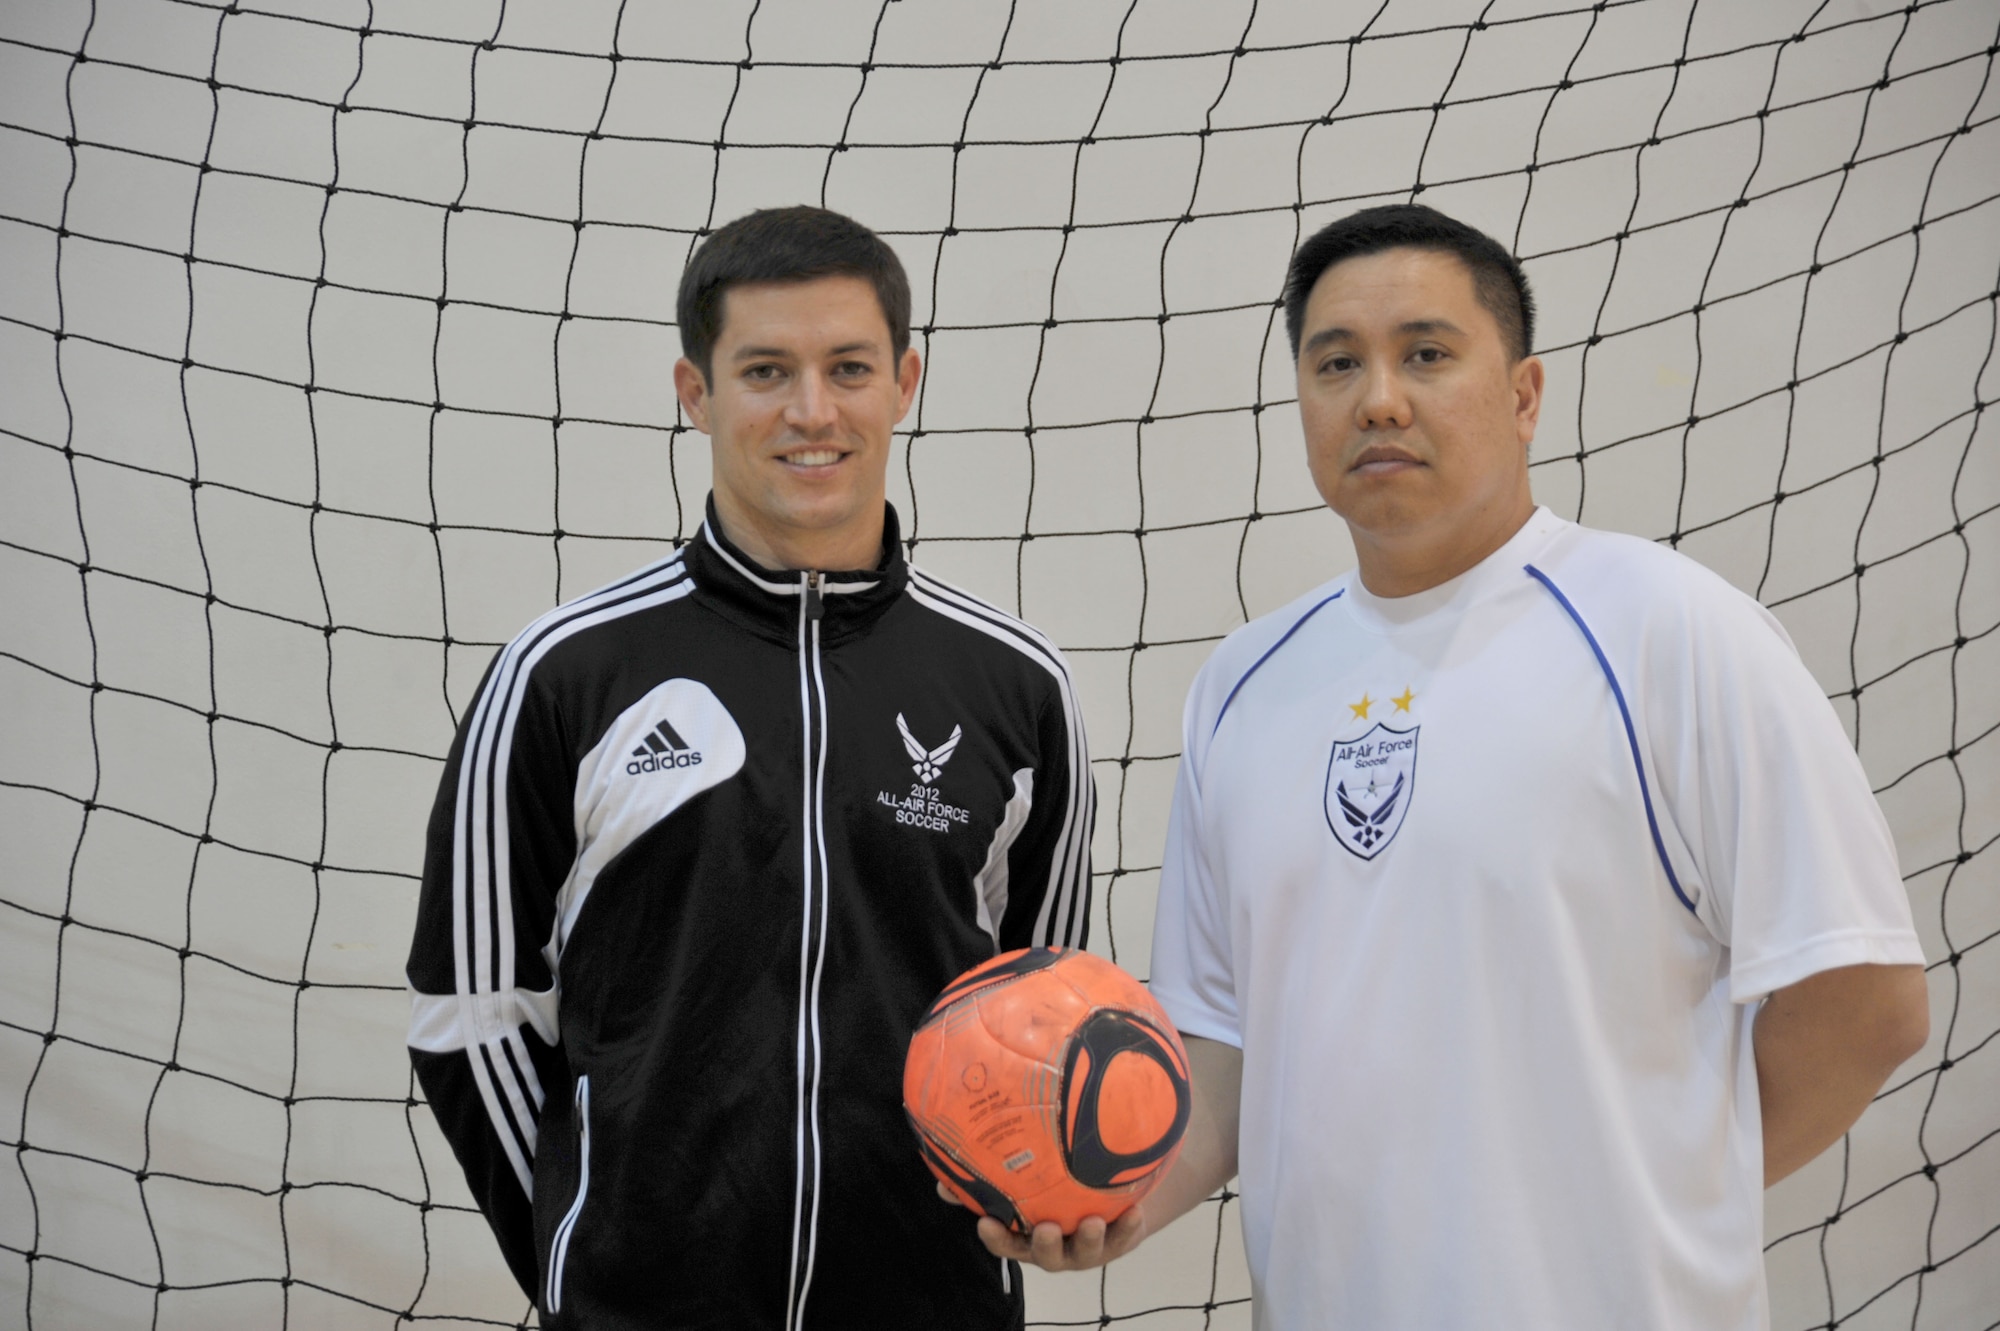 1st Lt. Richard Nova, 65th Civil Engineer Squadron Programs Management chief, and Tech. Sgt. Gilbert Gutierrez, 65th Medical Operations Squadron Physical Medicine flight chief, were selected for an opportunity to join the U.S. Armed Forces Soccer team in competition during the 2013 International Military Sports Council (CISM) 1st World Football Trophy in Baku, Azerbaijan, July 2 to 14. (U.S. Air Force photo by Staff Sgt. Angelique N. Smythe)